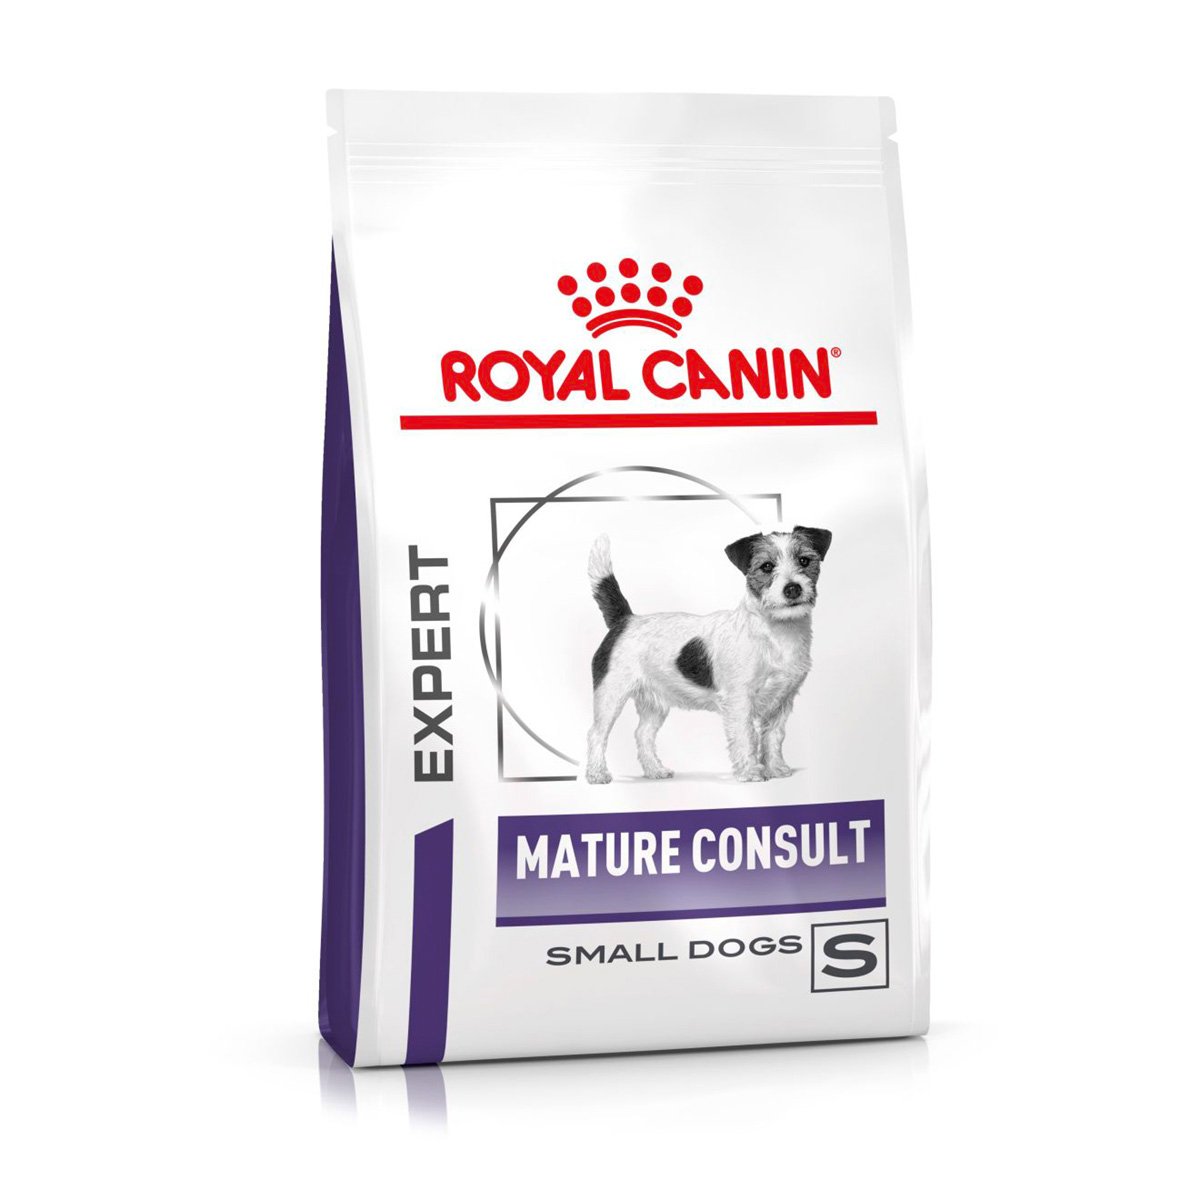 ROYAL CANIN® Expert MATURE CONSULT SMALL DOGS Trockenfutter für Hunde 1,5kg von Royal Canin